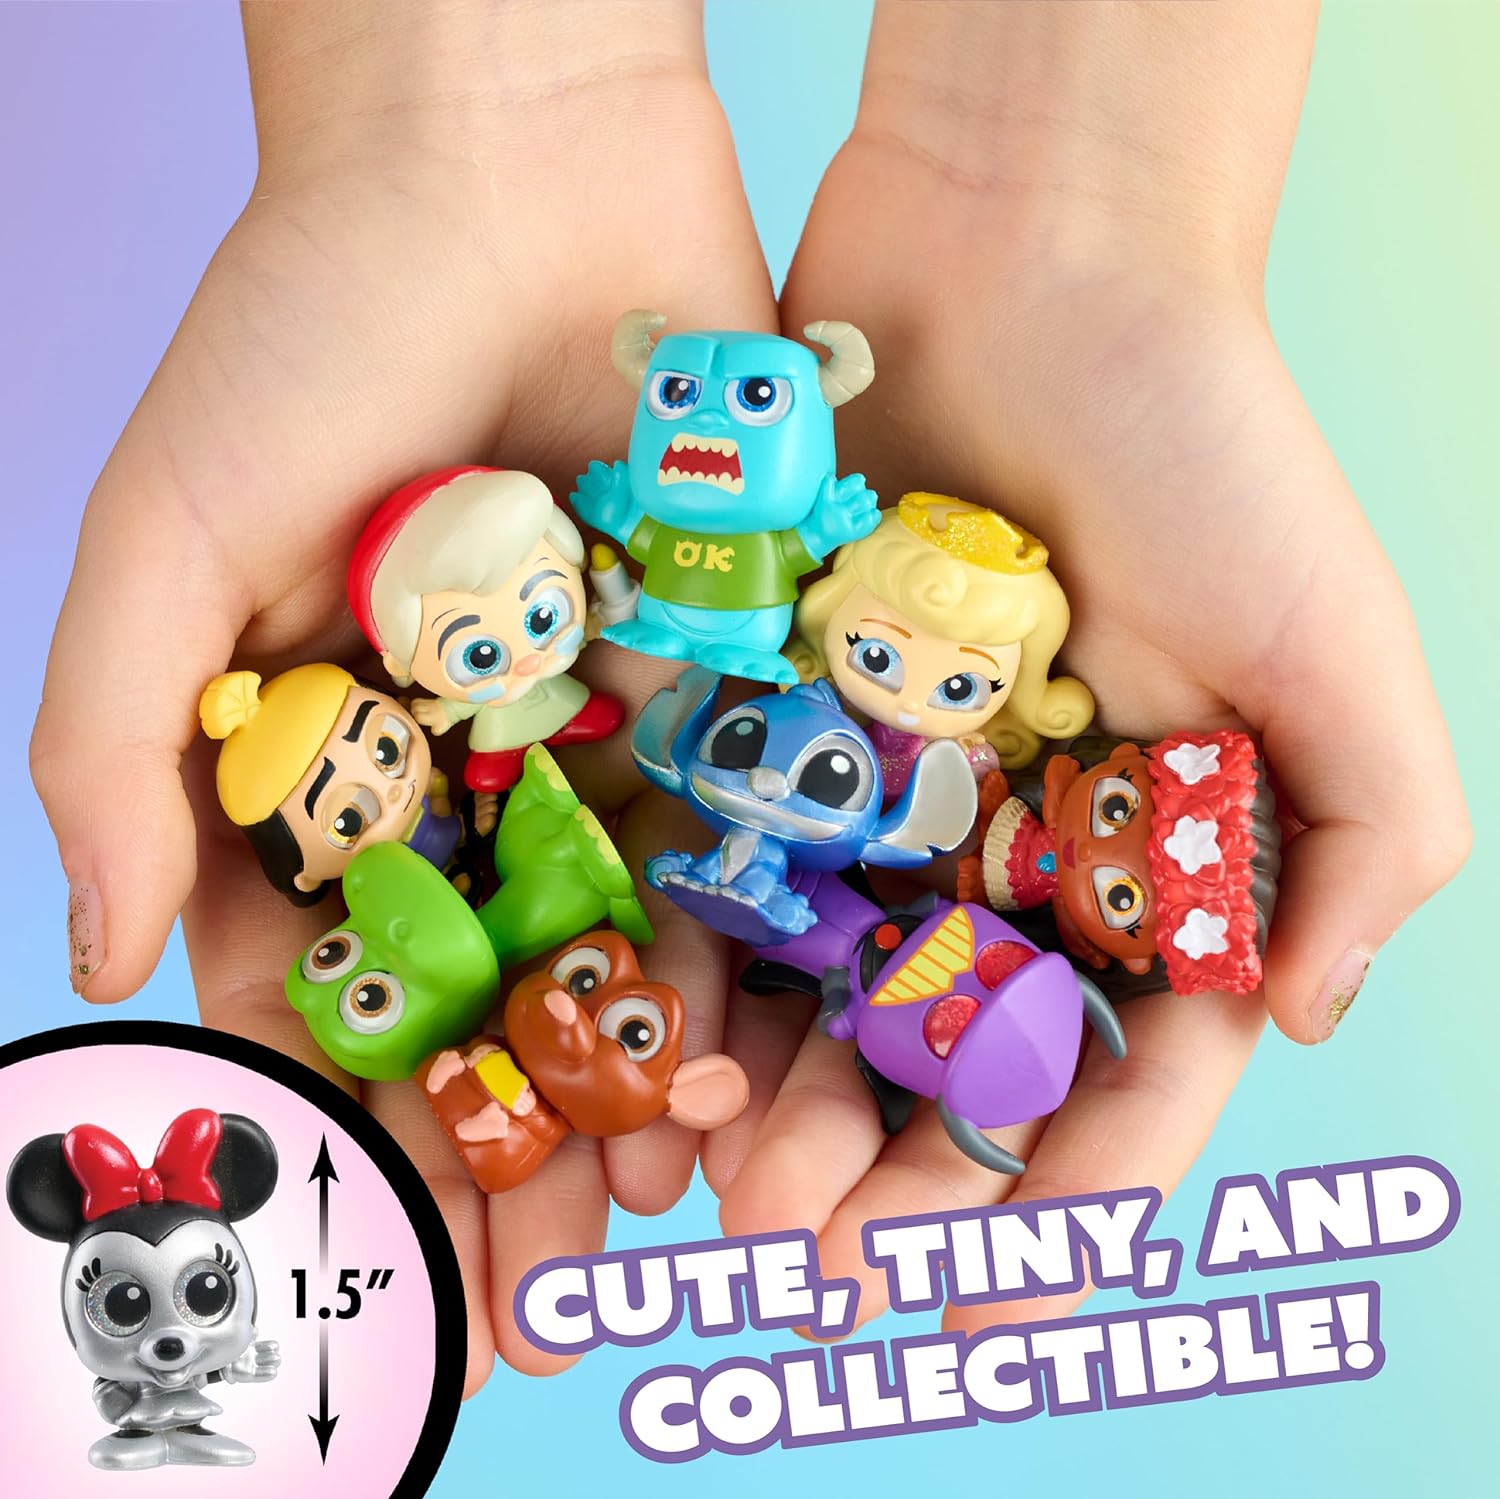 Disney Doorables NEW Multi Peek Series 10, Collectible Blind Bag Figures, Styles May Vary, Officially Licensed Kids Toys for Ages 5 Up by Just Play